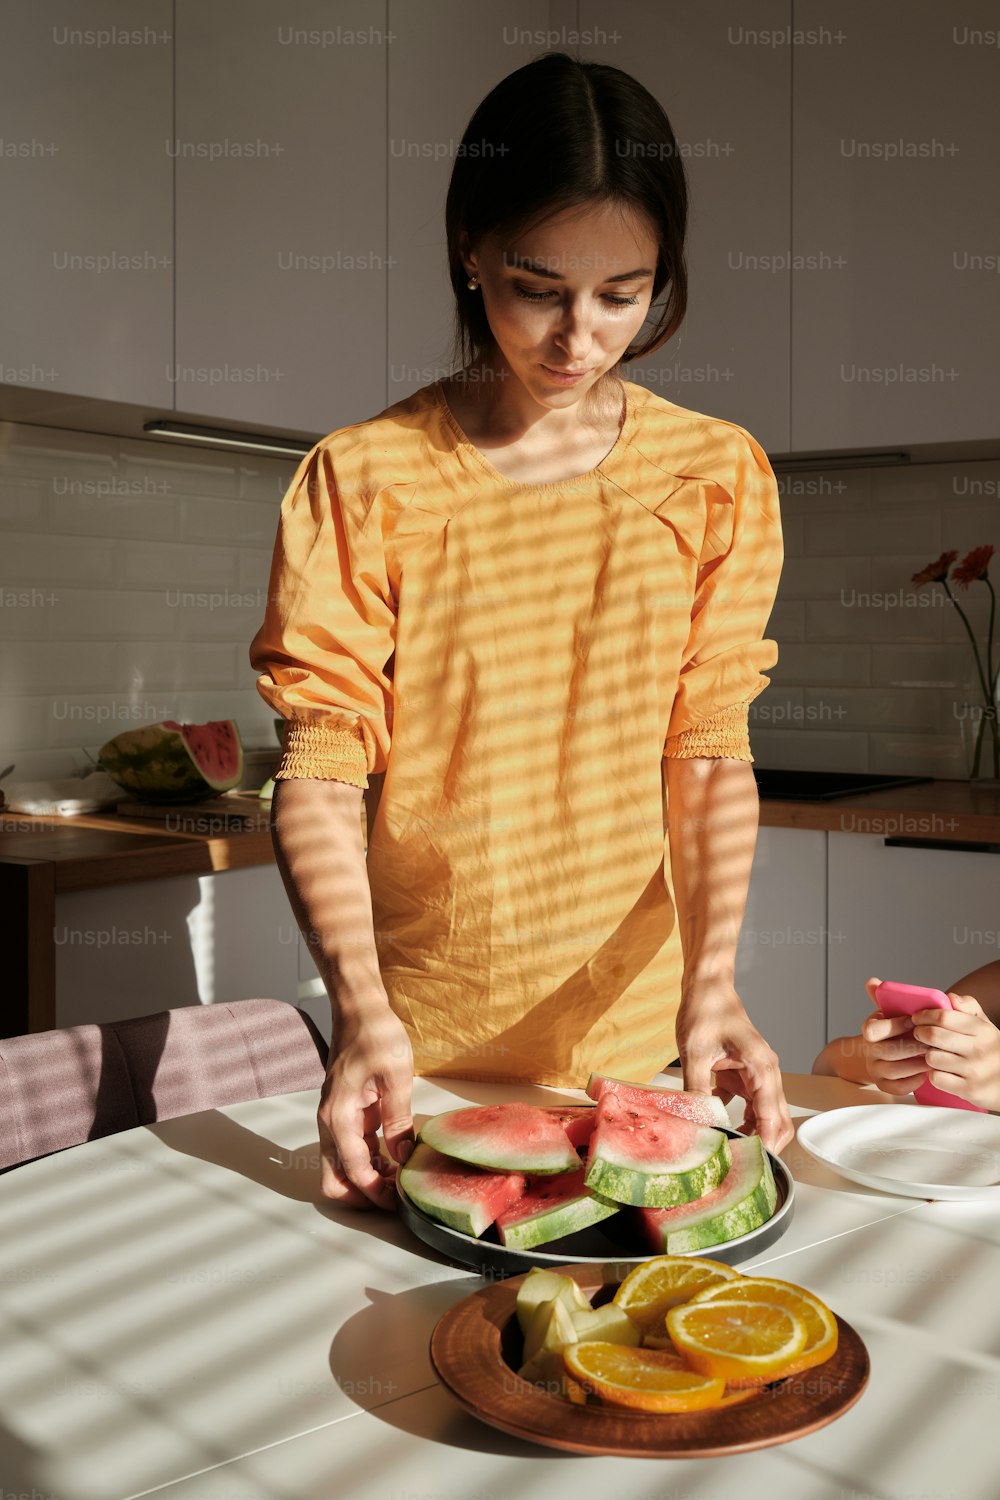 a woman cutting up a watermelon slice on a plate